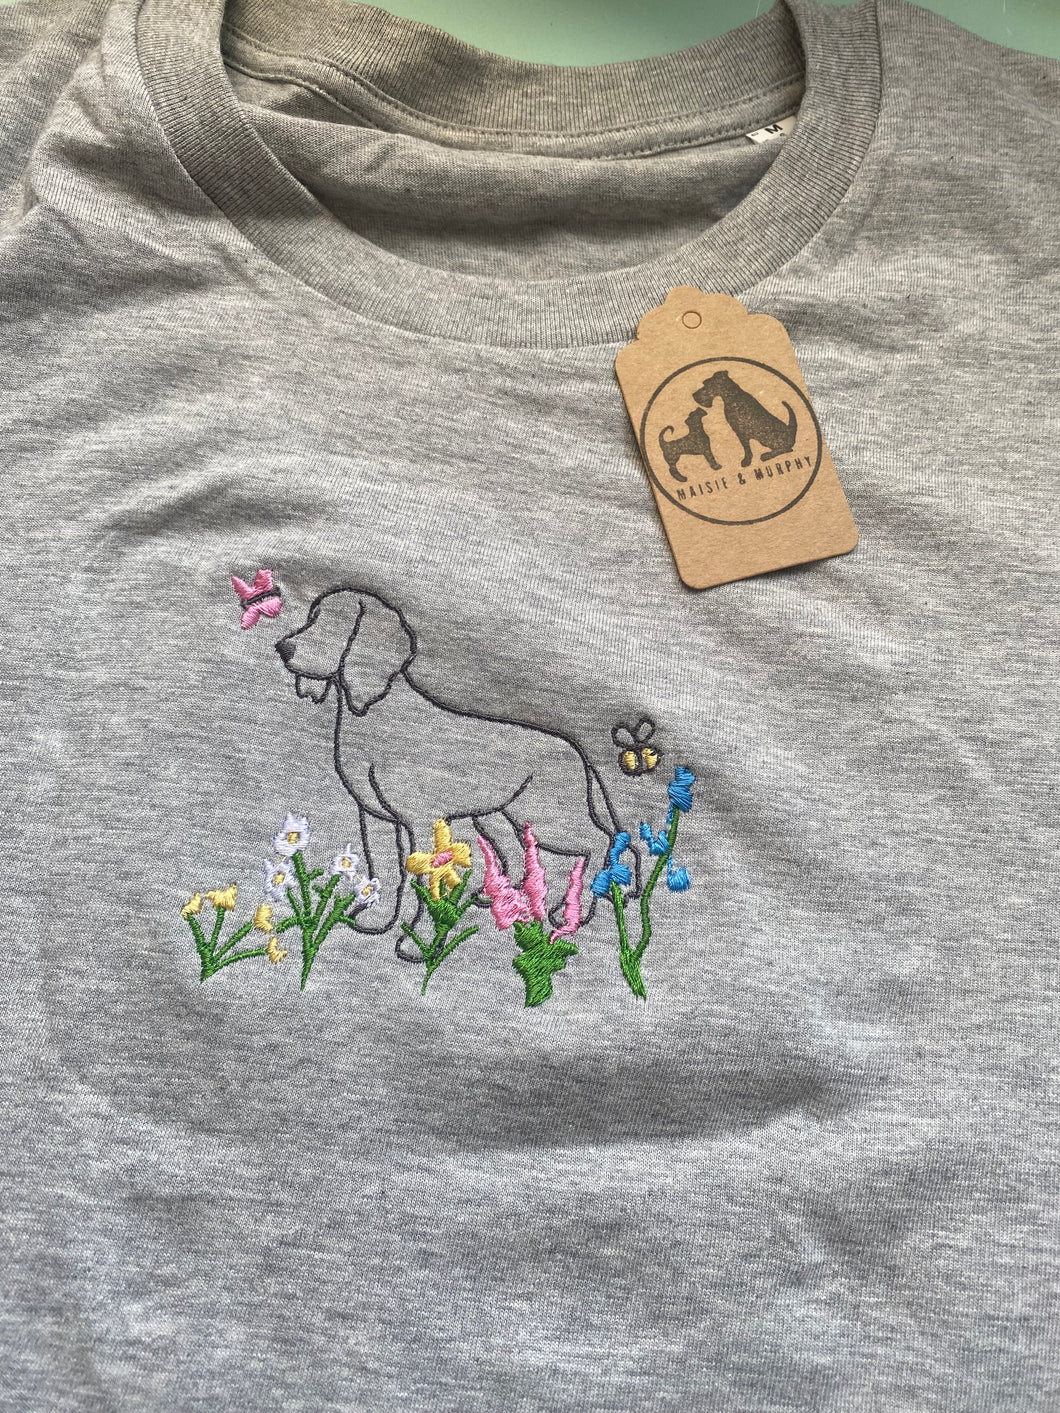 SILHOUETTE STYLE- Wildflower Dogs T-Shirt- Embroidered tee for dog lovers